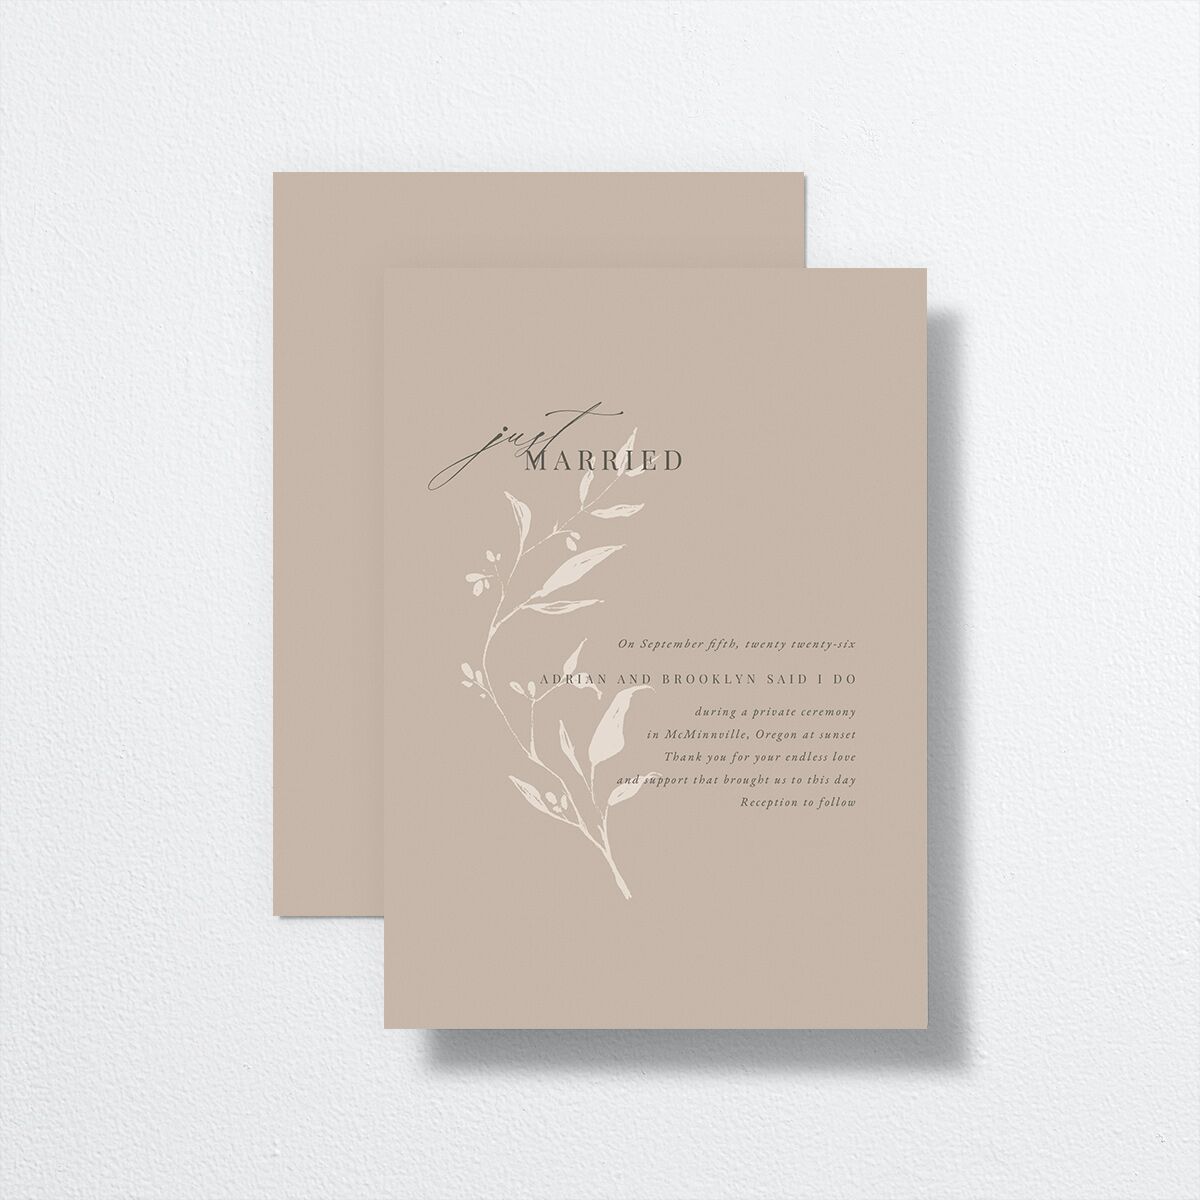 Rustic Minimal Change the Date Cards front-and-back in Cream